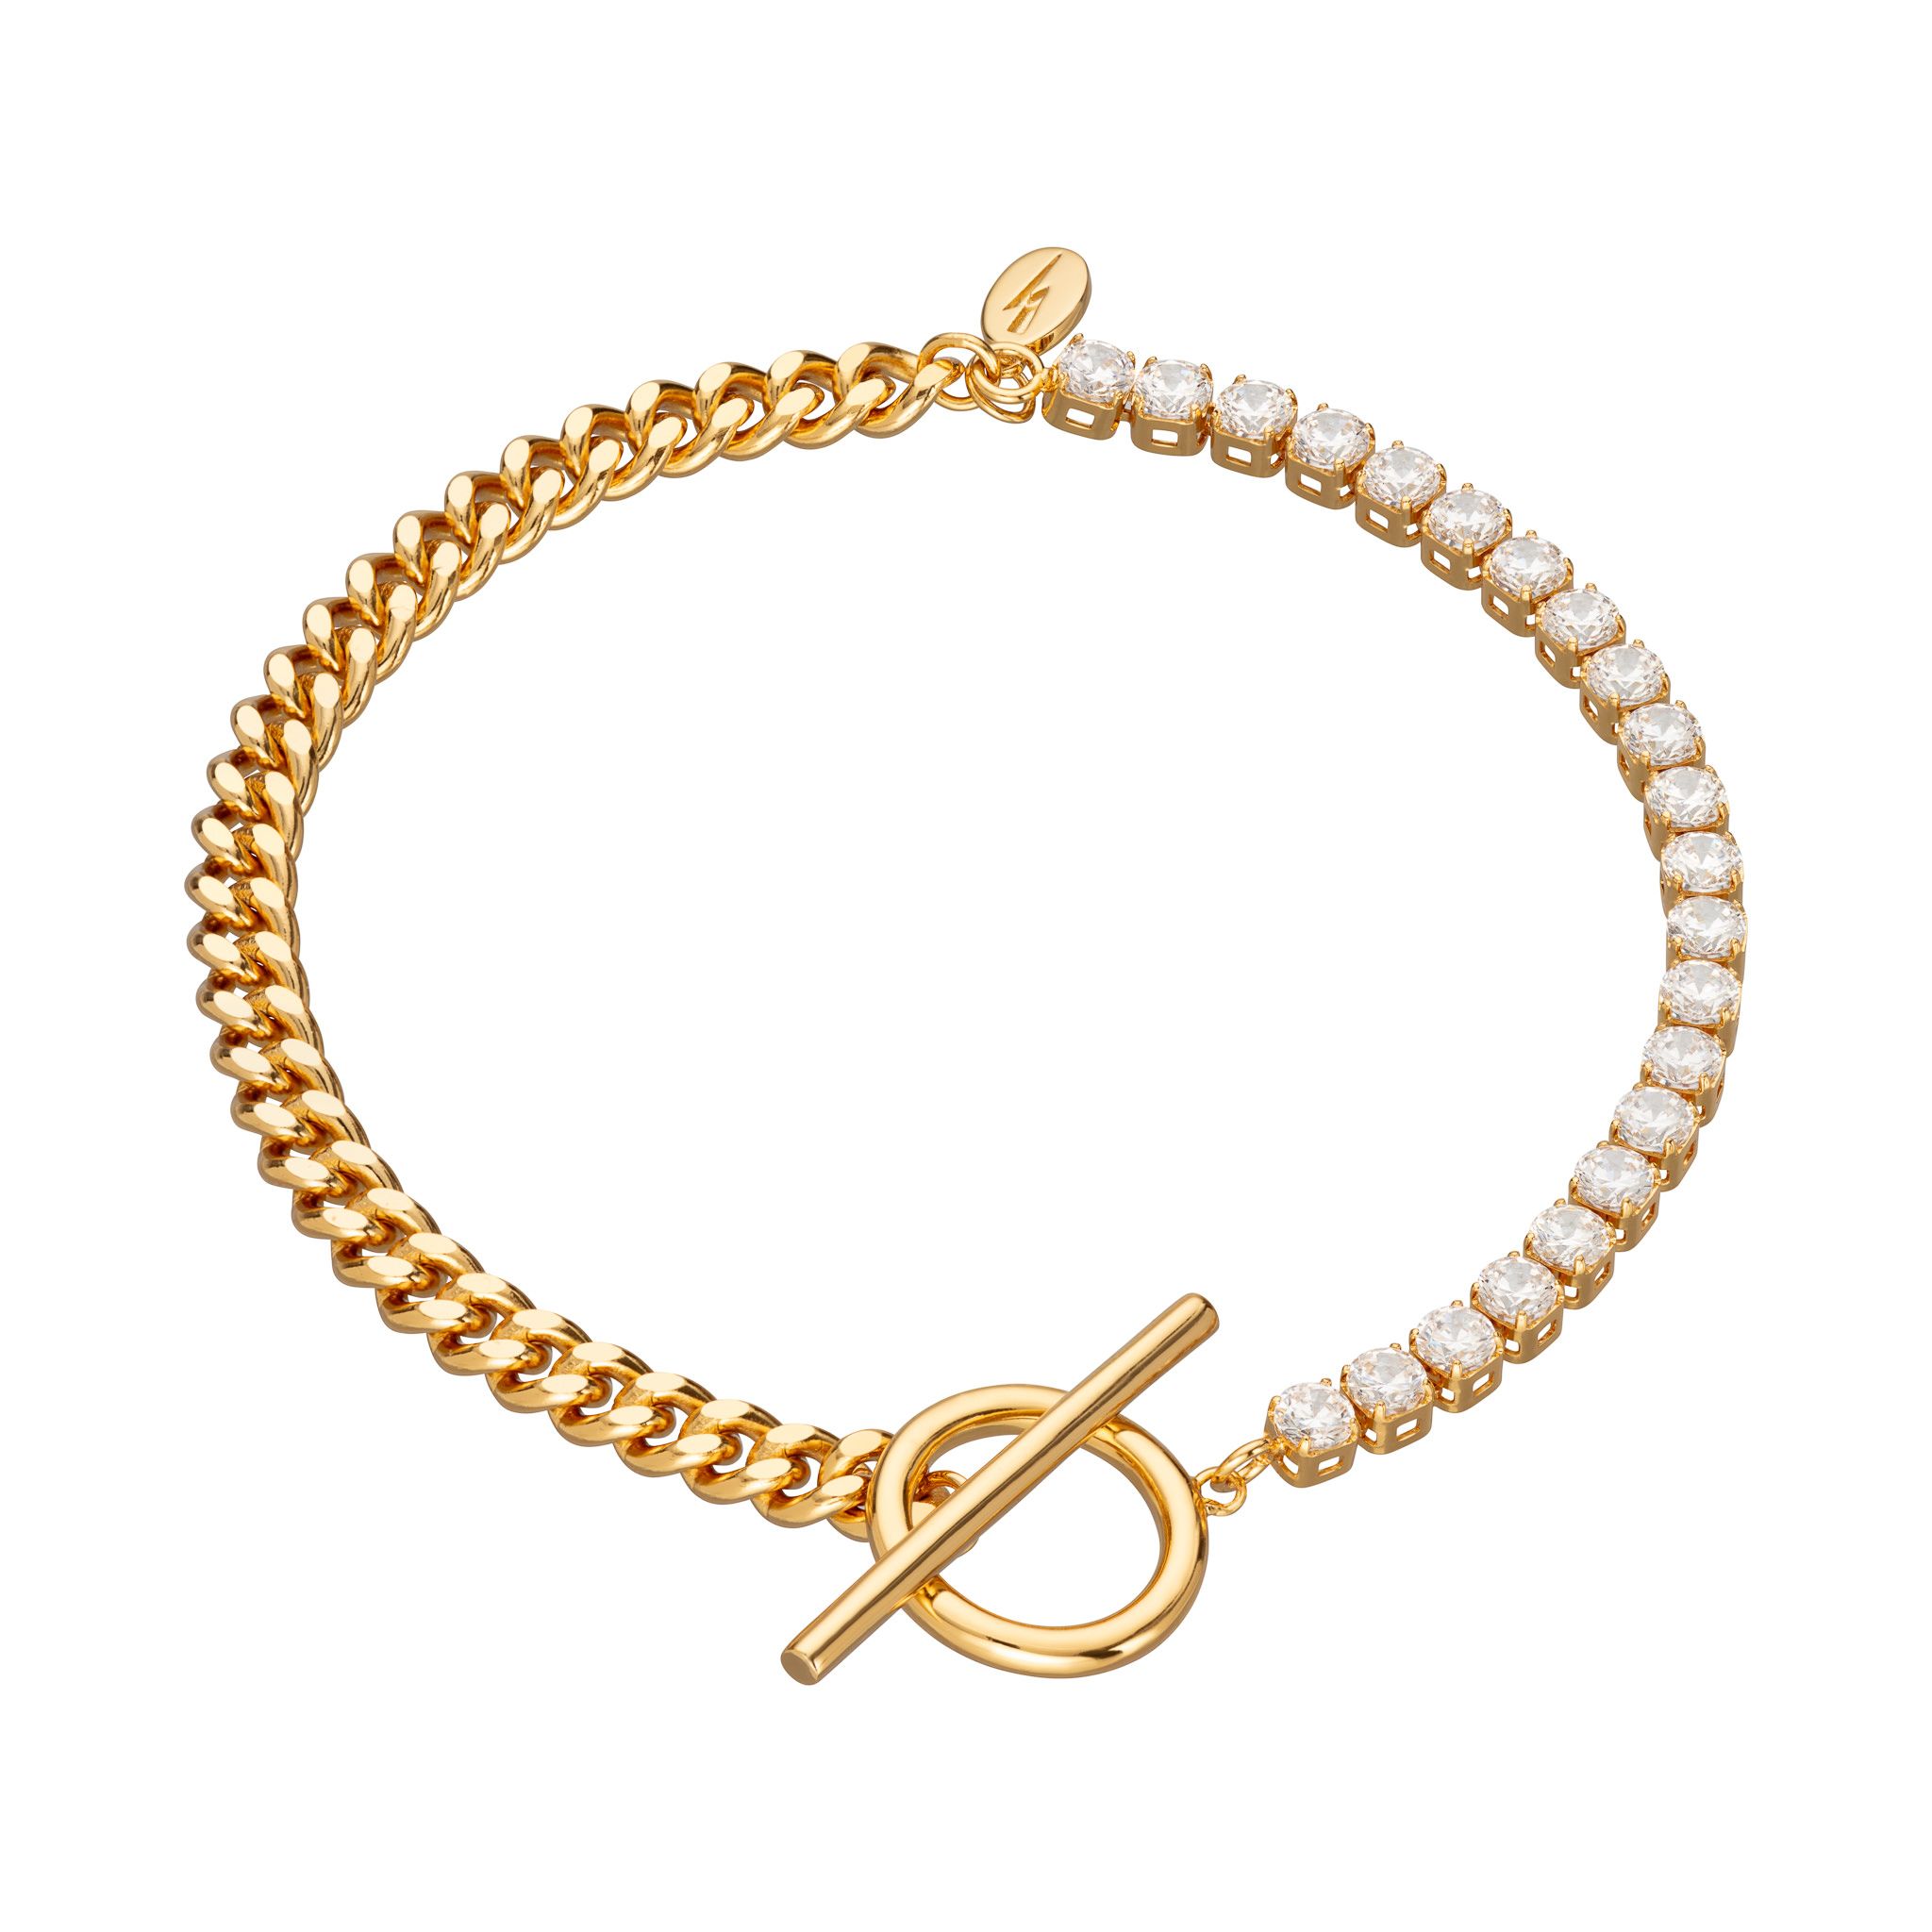 Tennis & Curb Chain Bracelet with T Bar Clasp